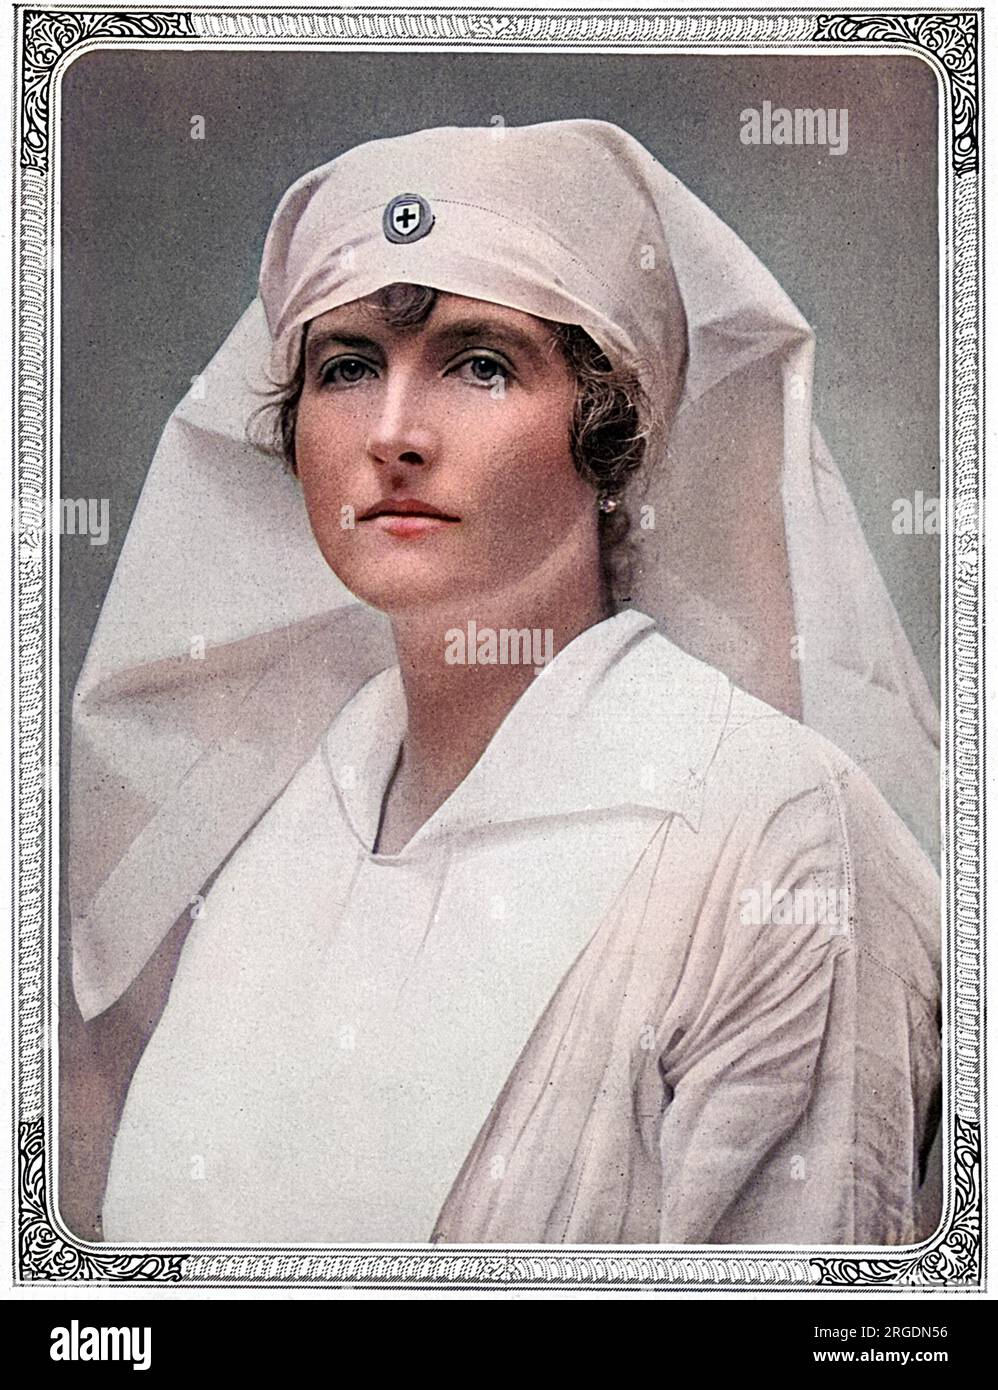 Lady Swettenham, formerly Mary Emily Copeland, wife of the famous colonial administrator, Sir Alexander Sweettenhan, K.C.M.G, pictured in nursing uniform during the First World War when she was an ambulance worker out at the front in France. Stock Photo